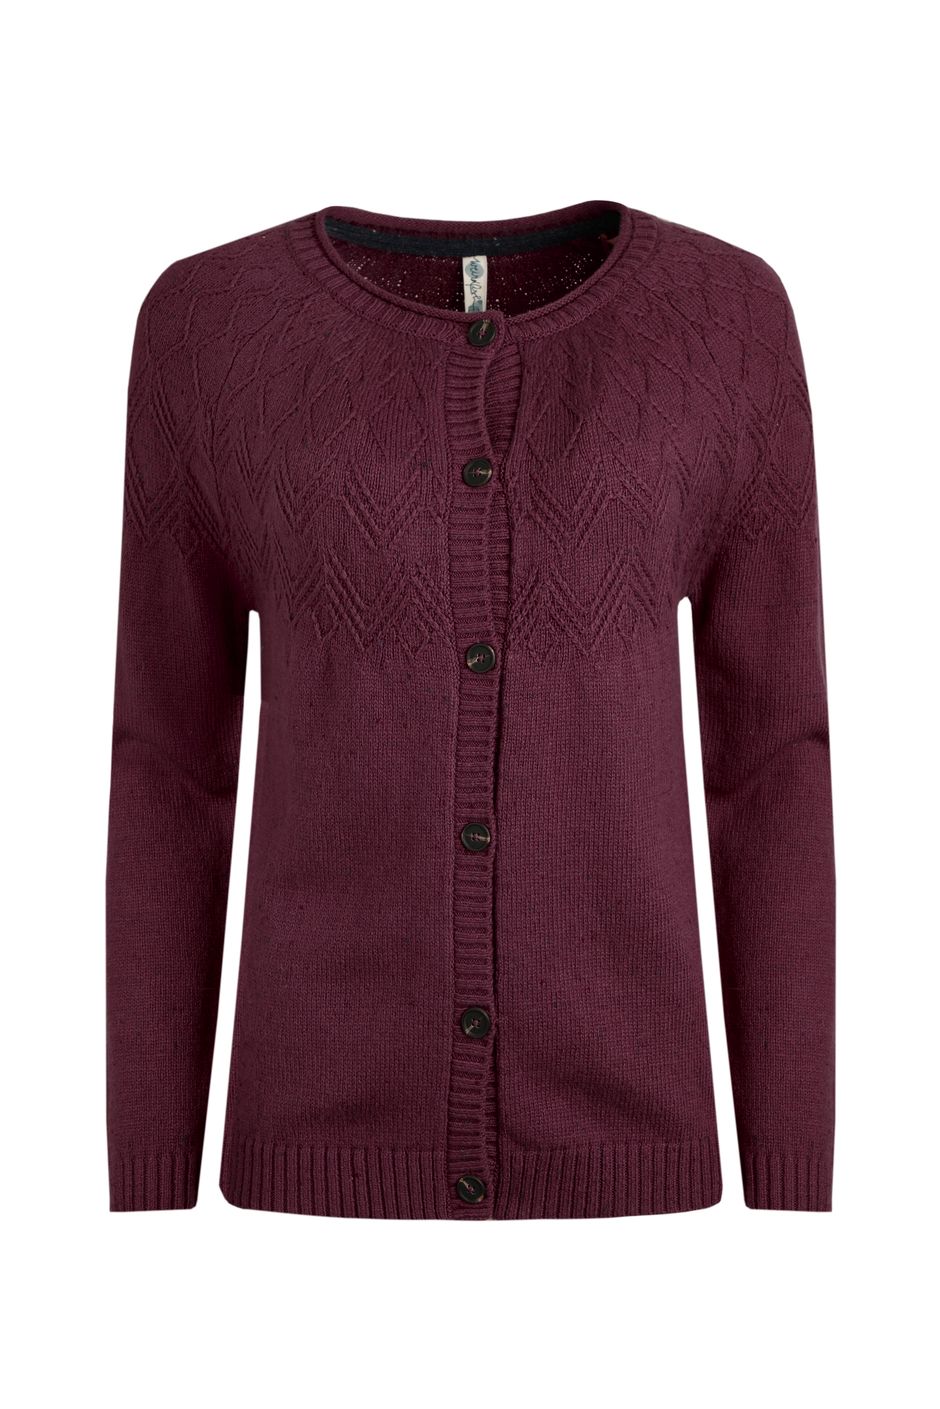 Caballo Eco Outfitter Cardigan Crushed Berry